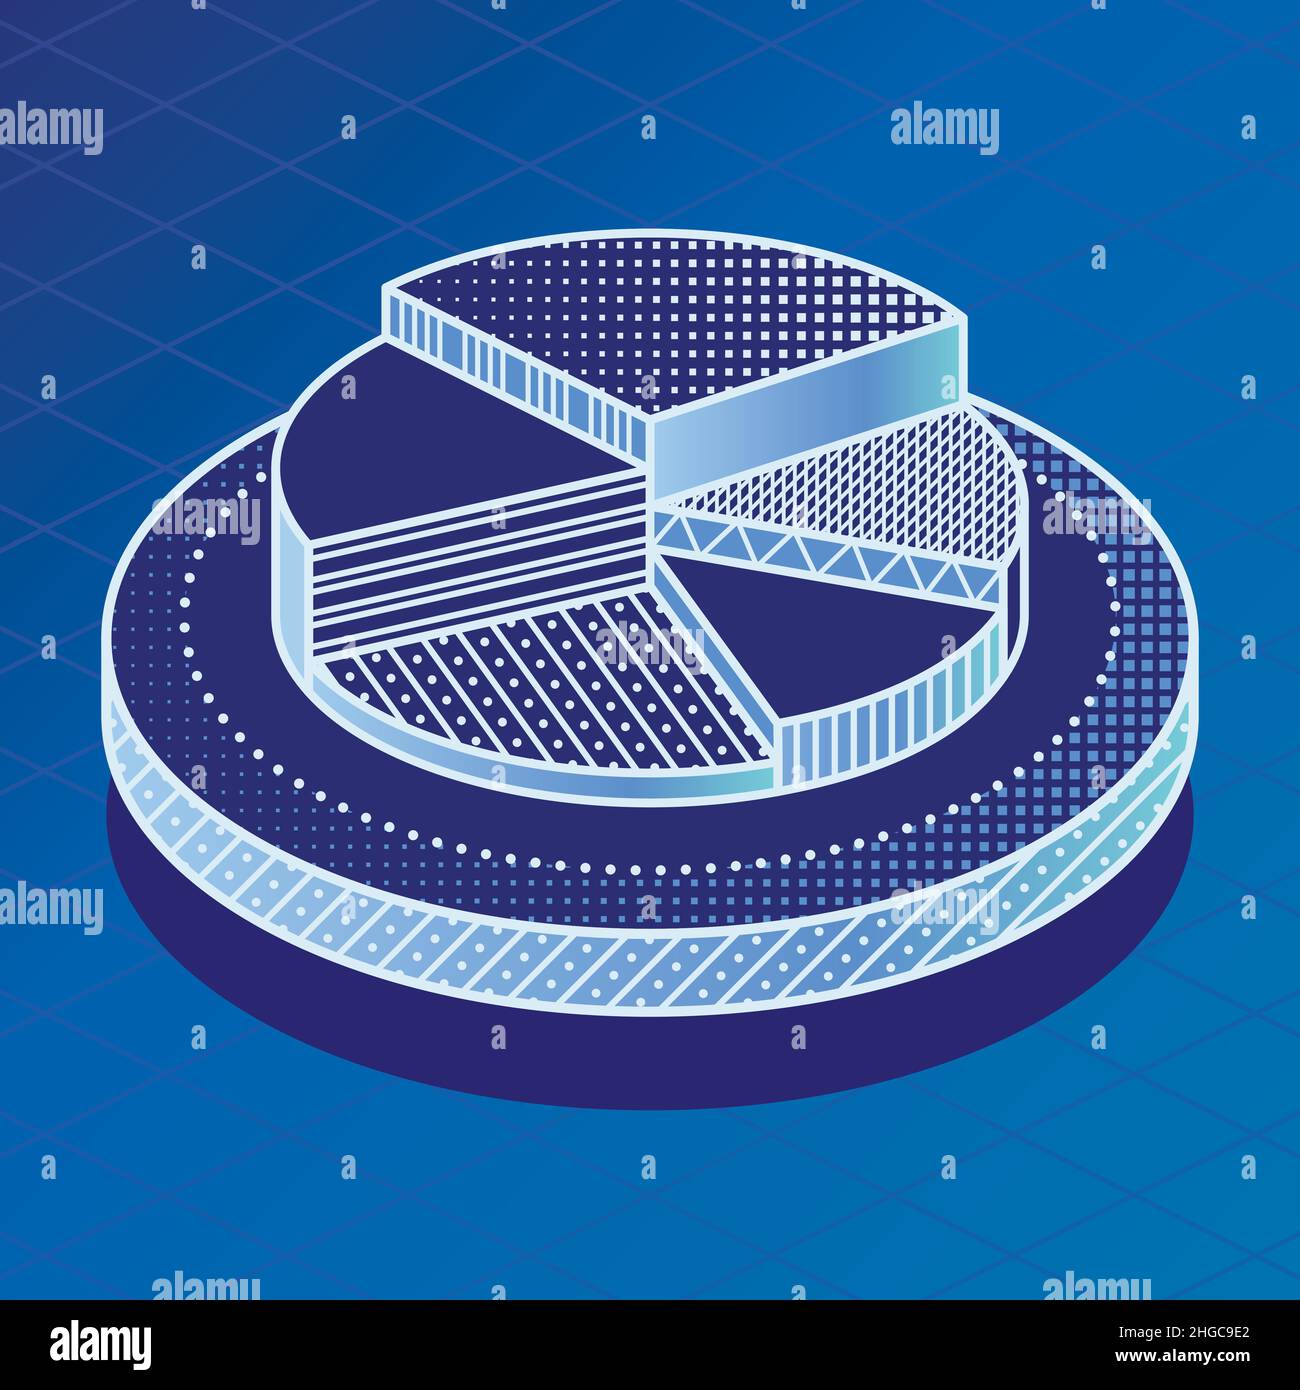 Pie Chart Infographic Element. Isometric Pie Diagram on Blue Background. Vector Illustration. Stock Vector